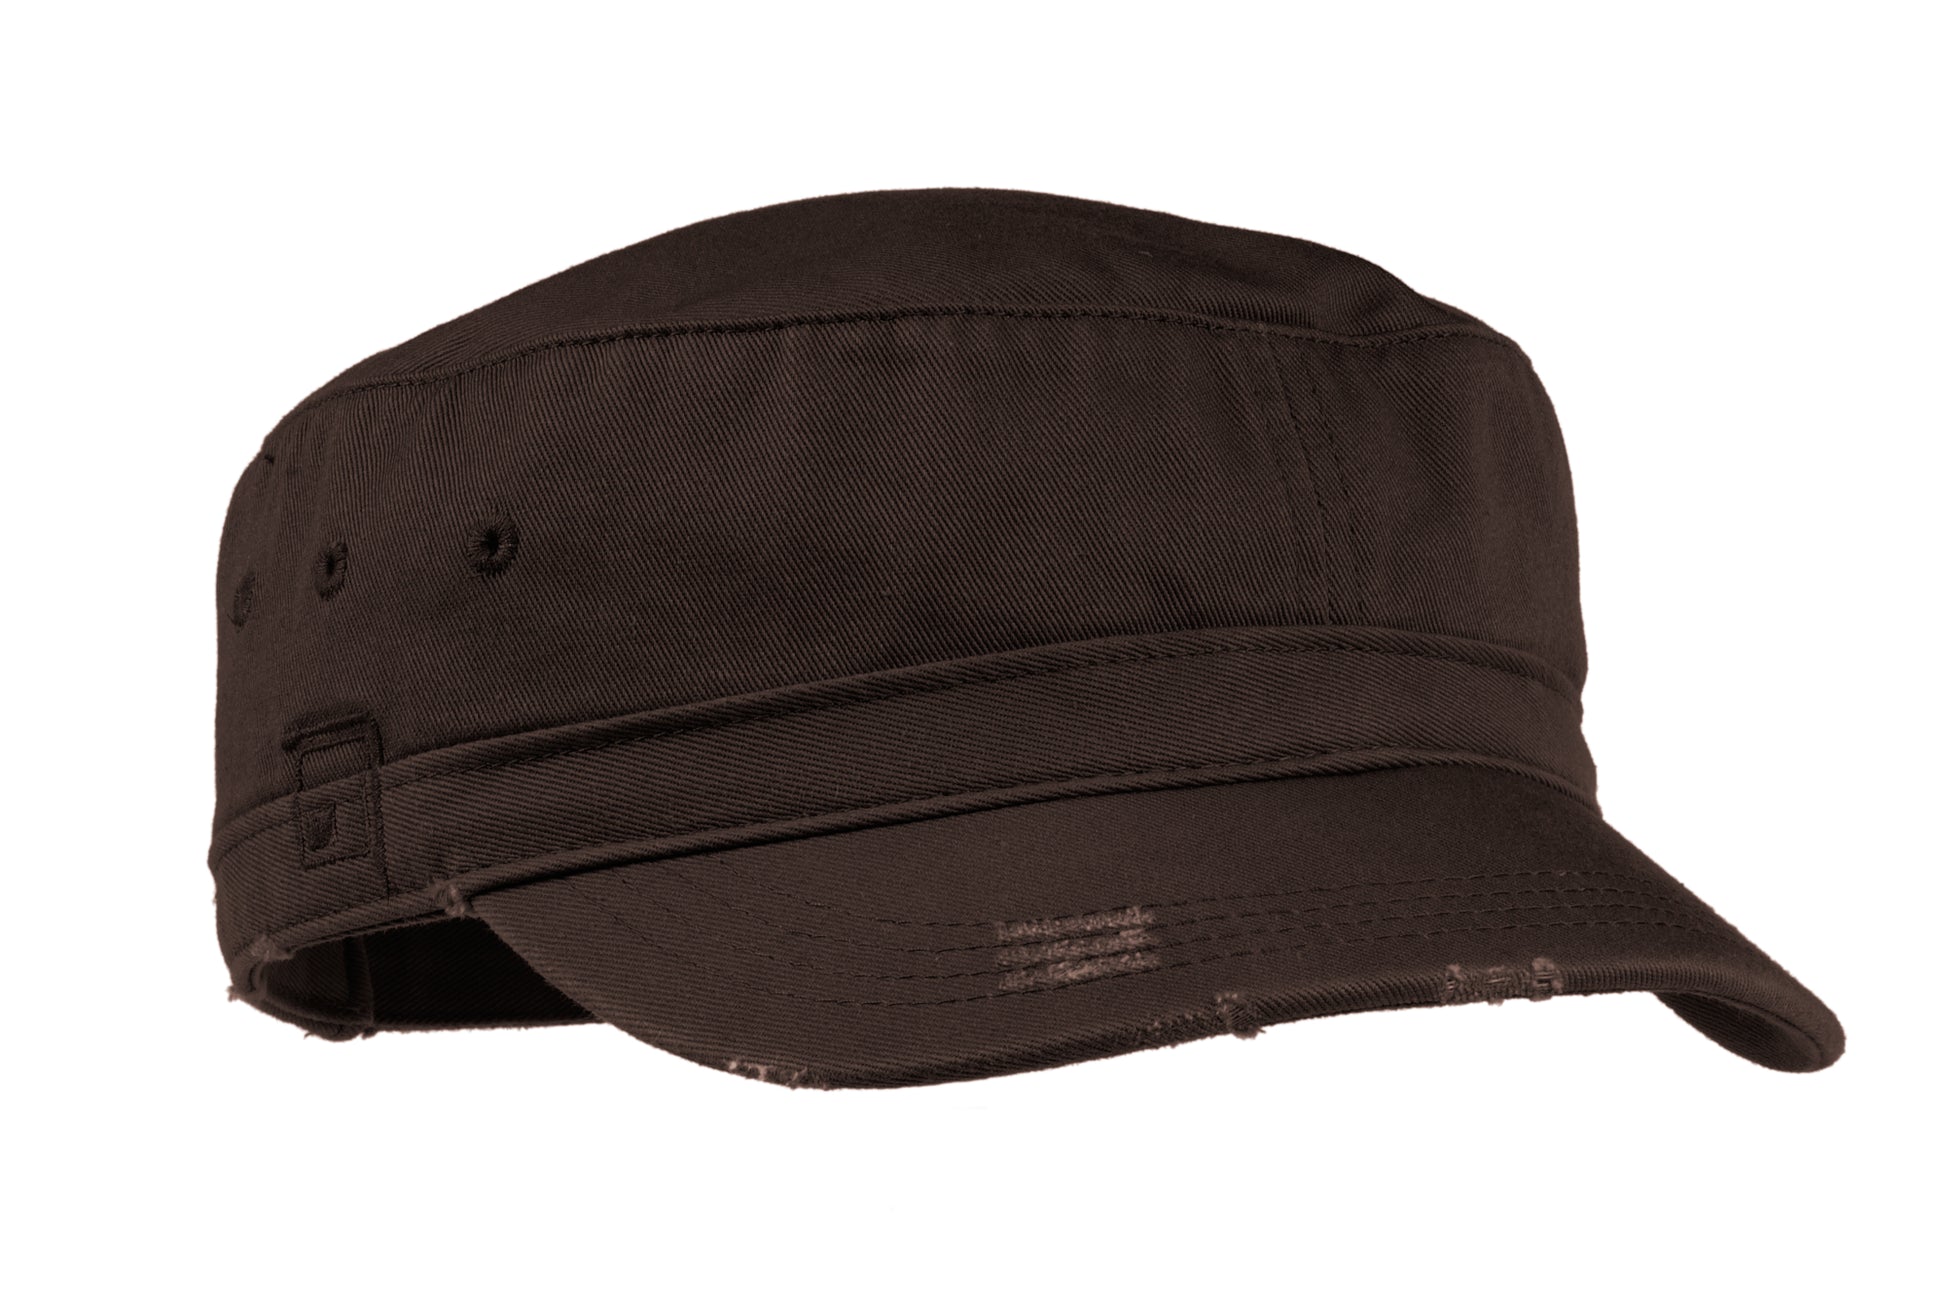 district distressed military hat chocolate brown